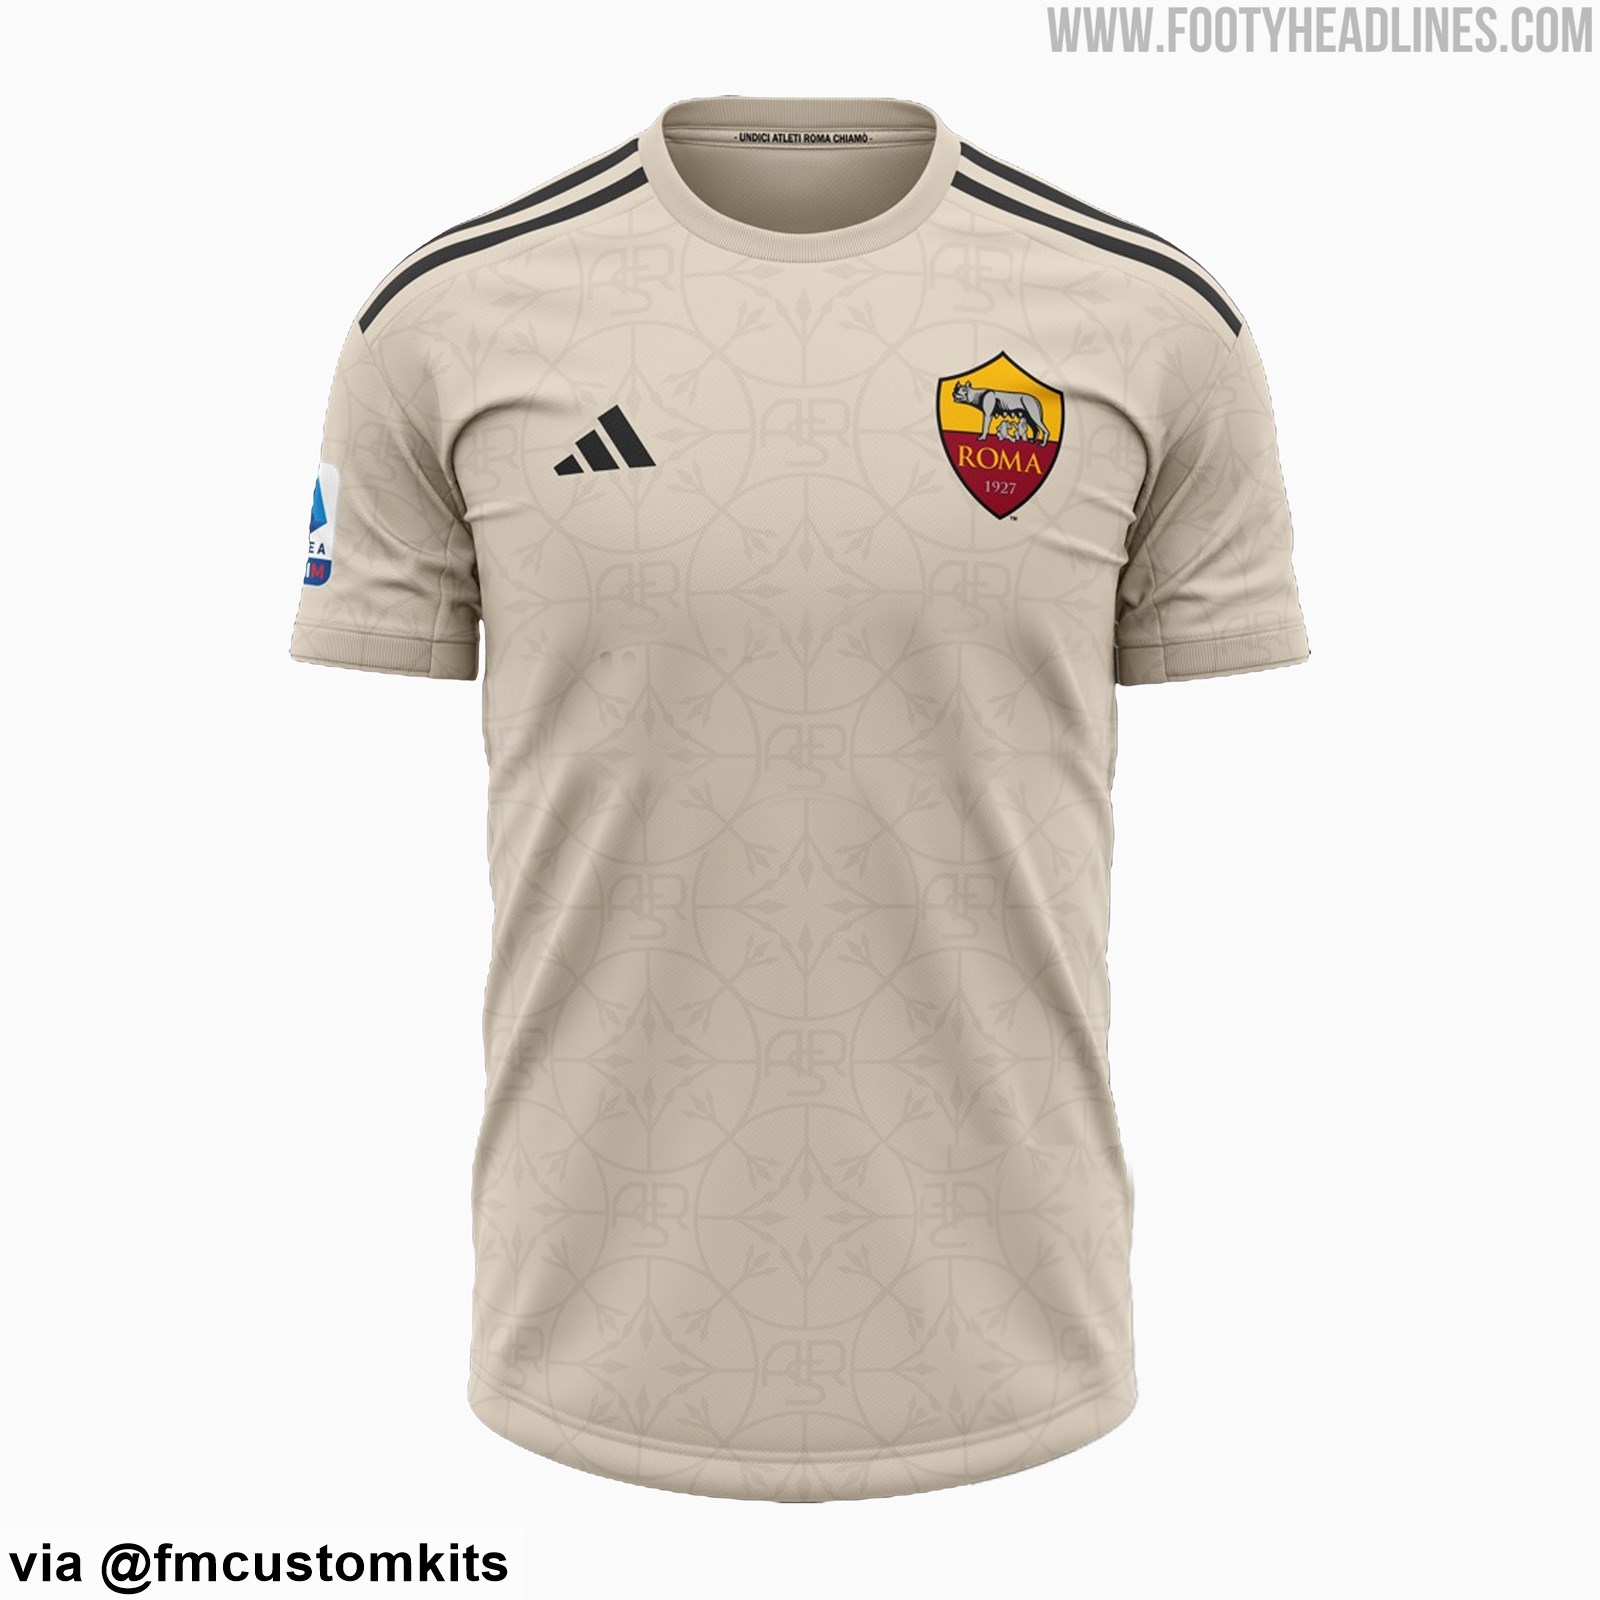 No More New Balance: Adidas AS Roma 23-24 Home Kit Released + Away